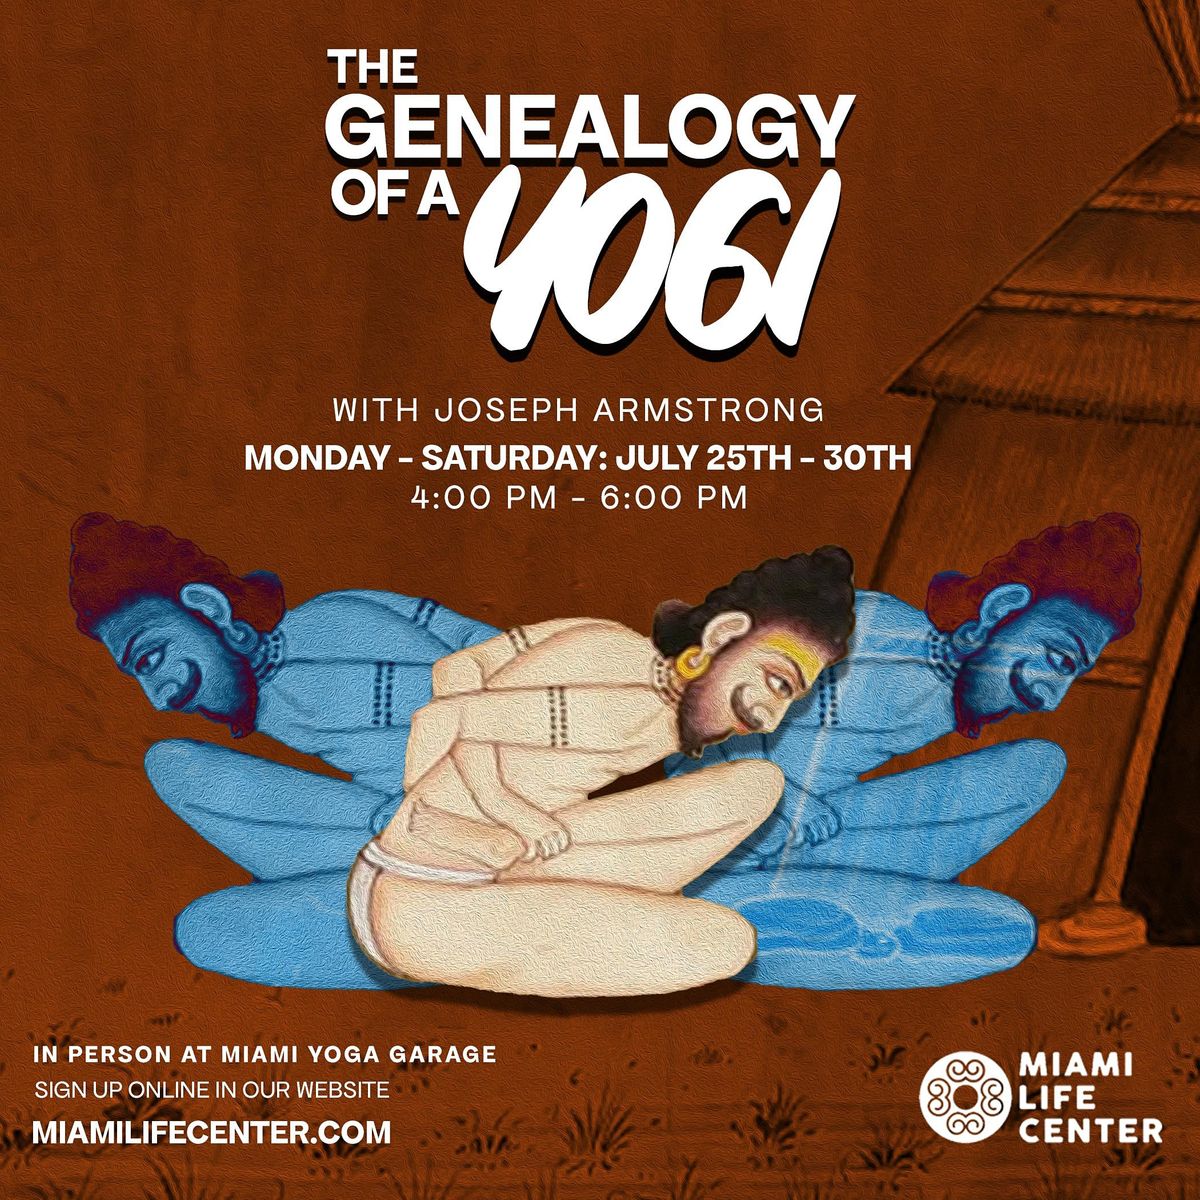 The Genealogy of a Yogi with Joseph Armstrong